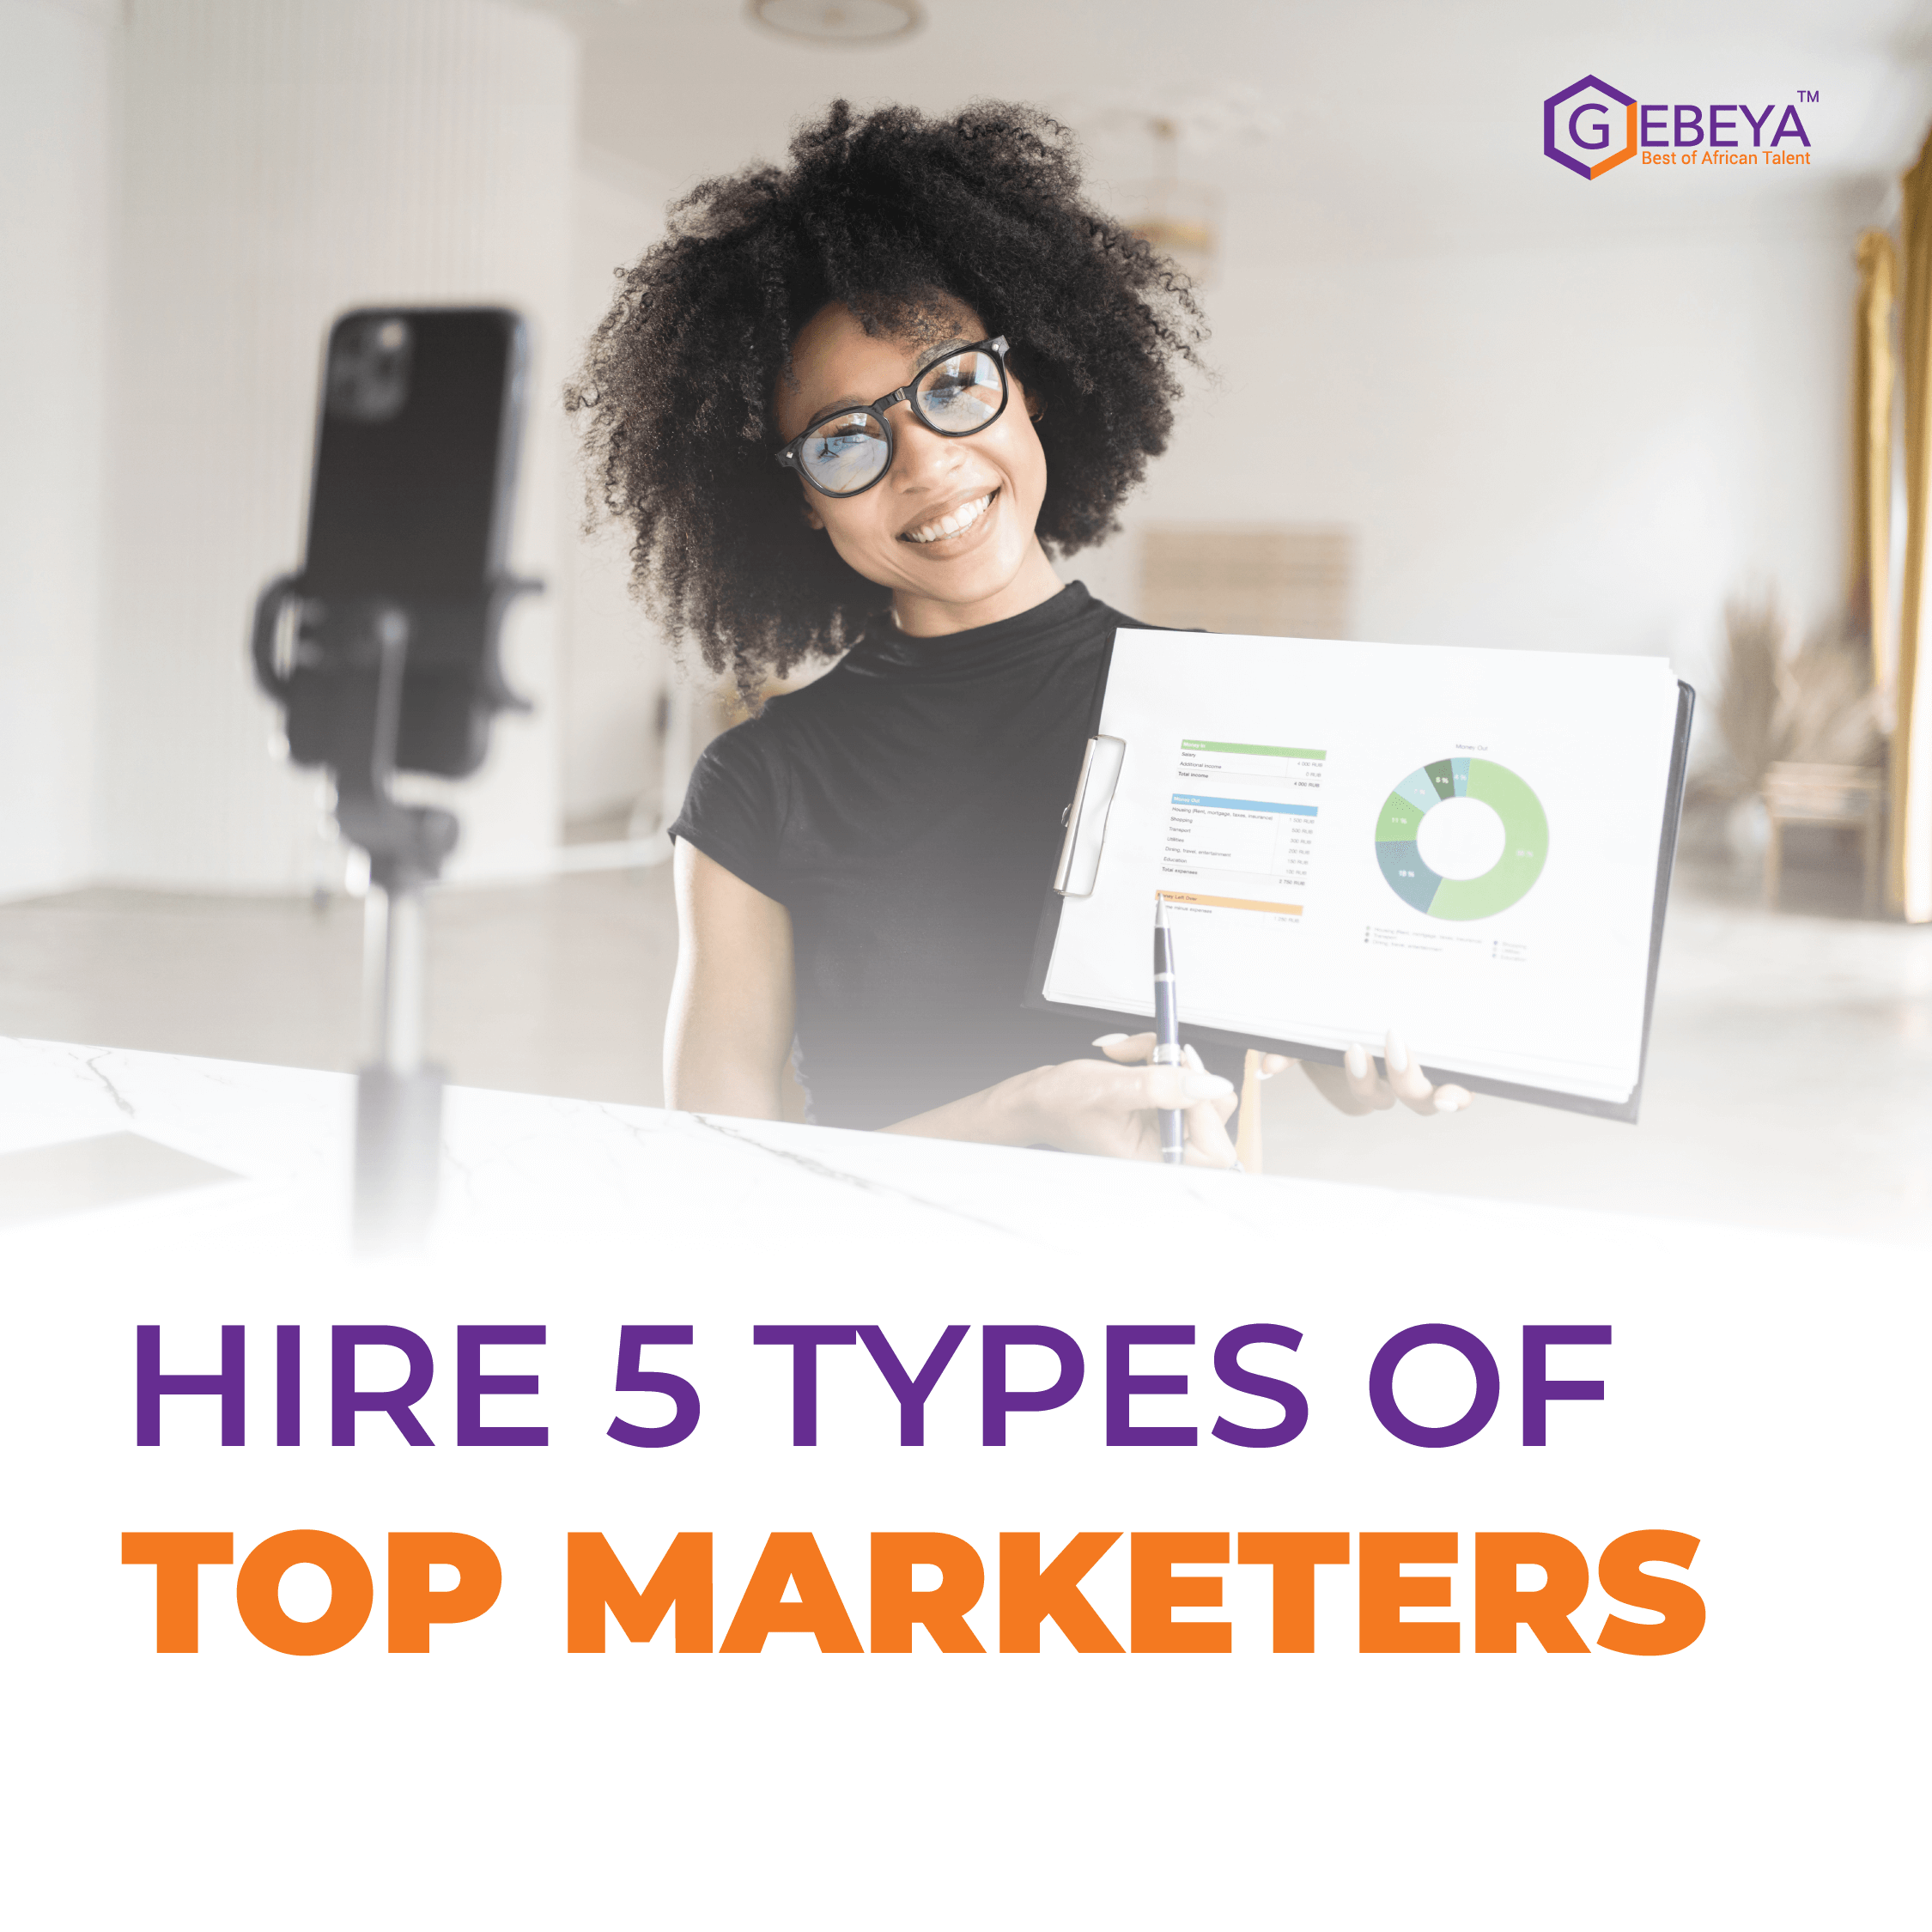 Hire 5 Types of Top Marketers on Gebeya